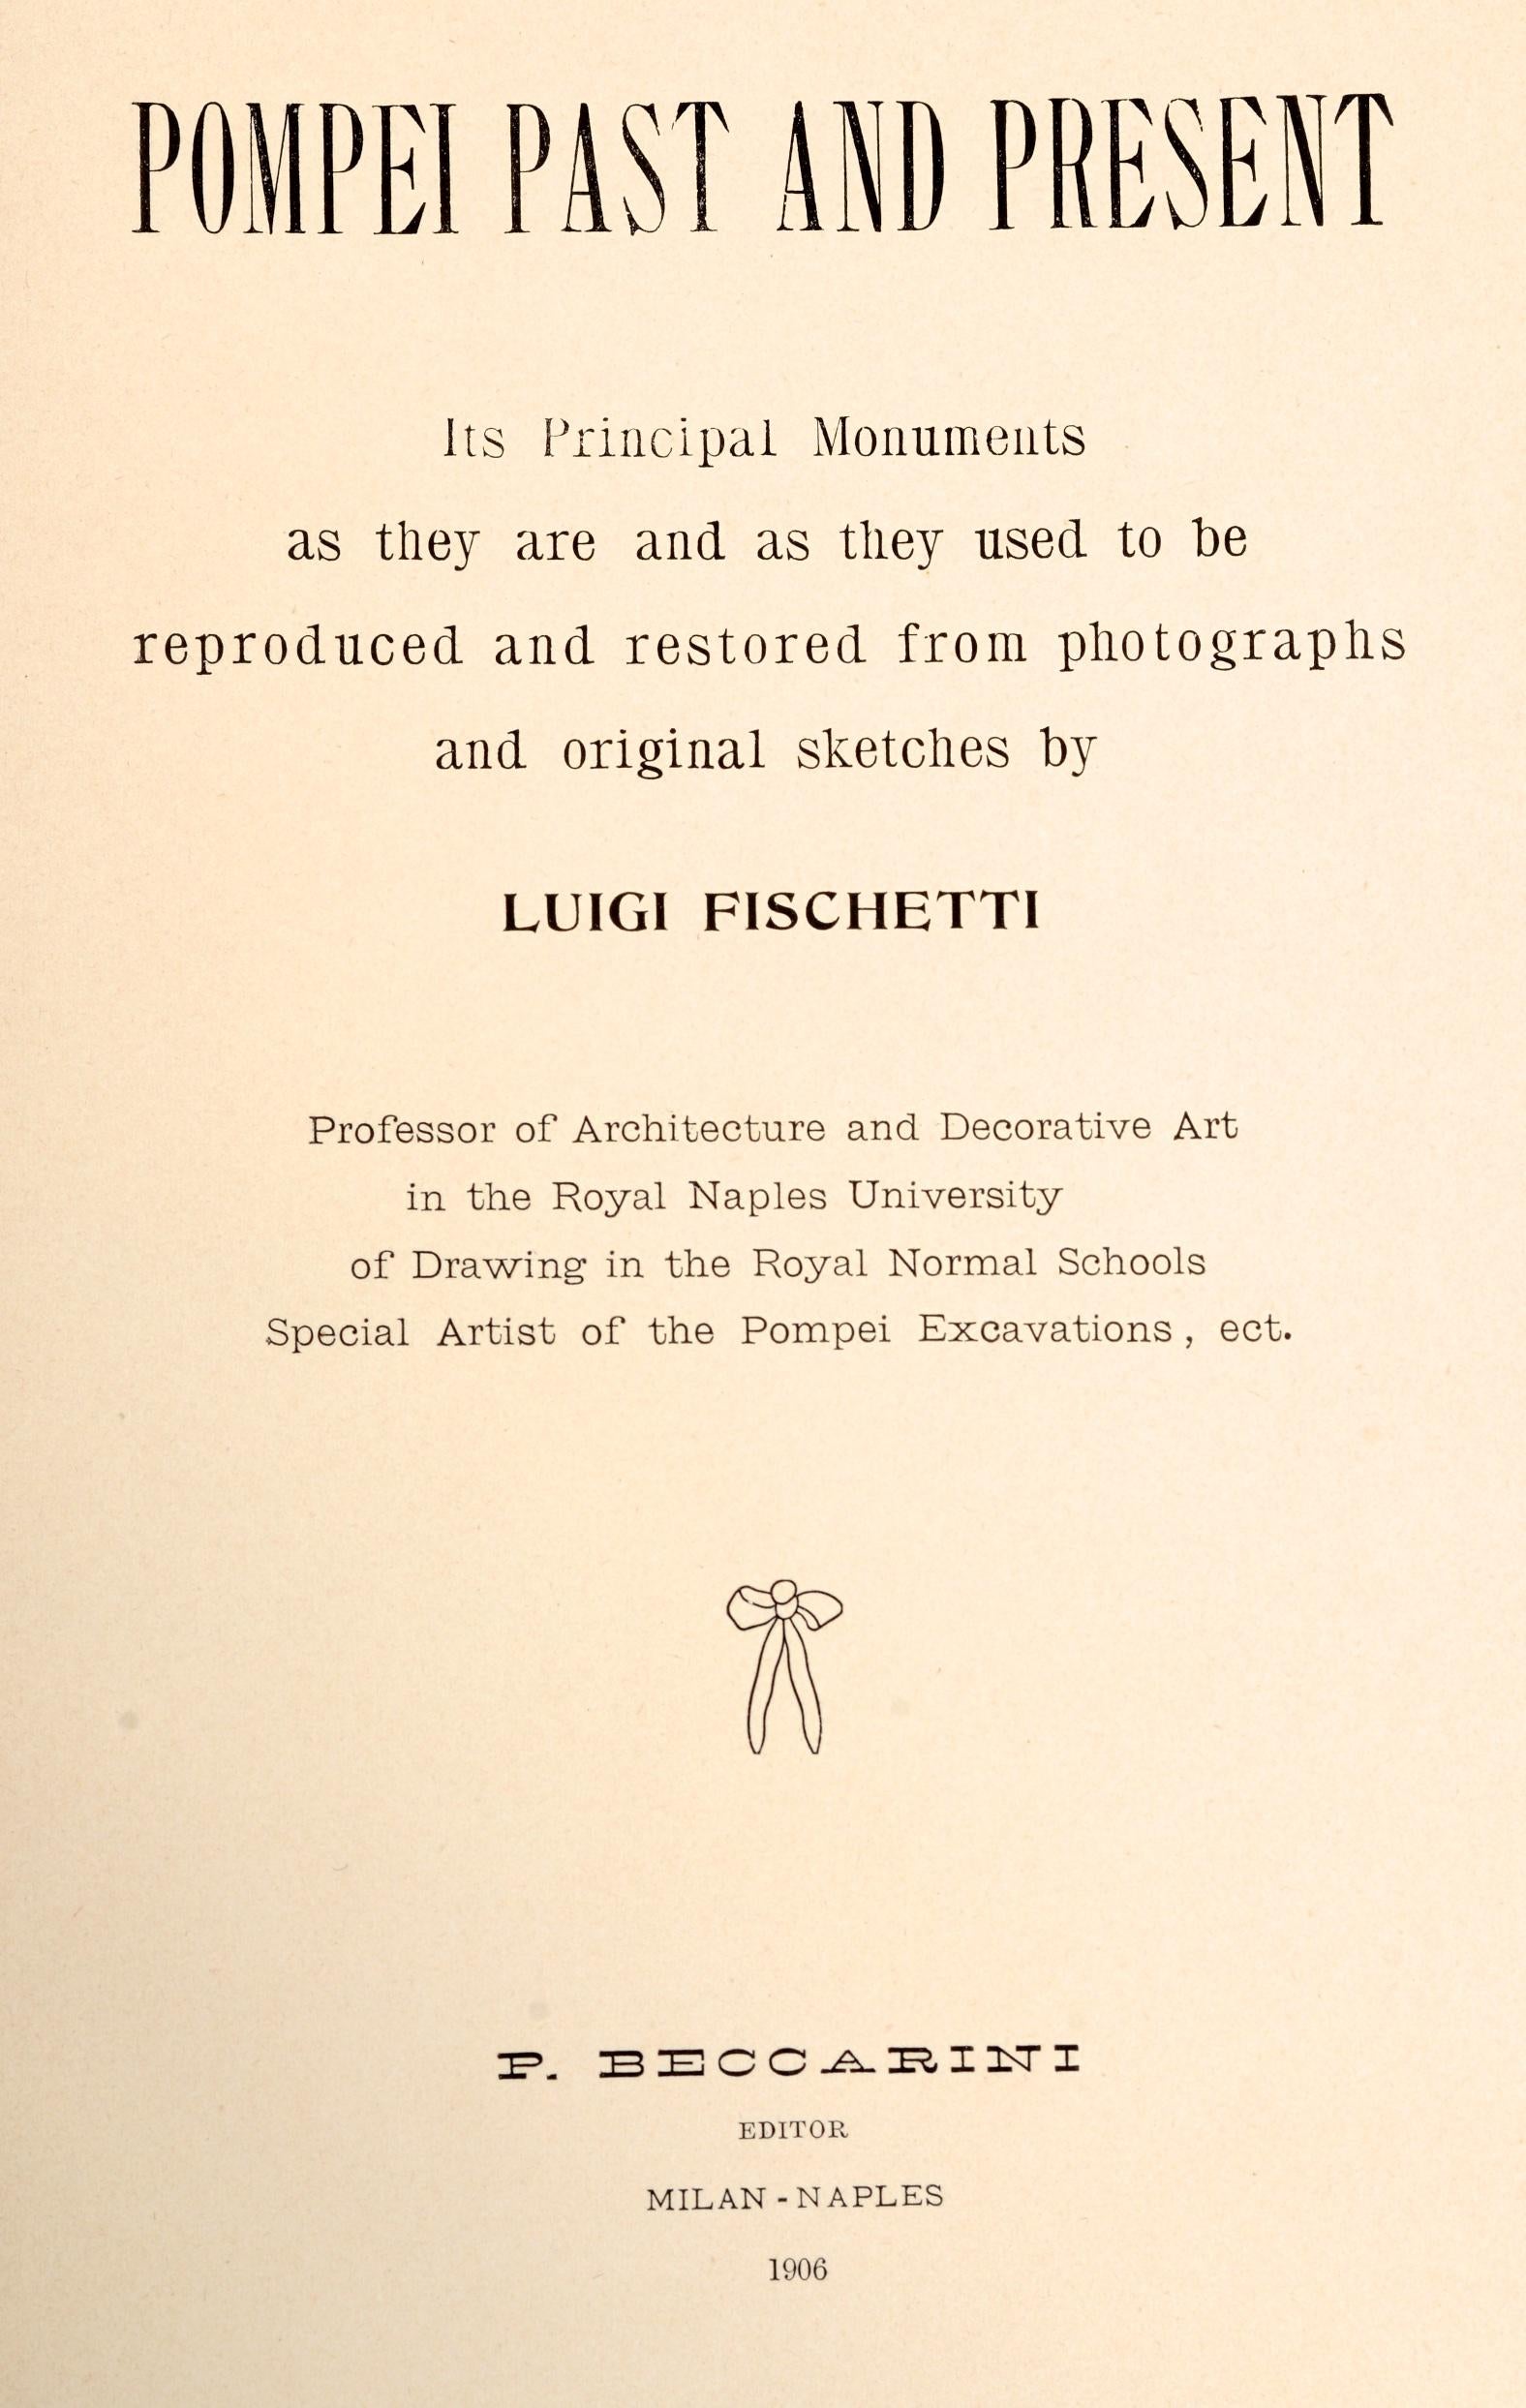 Pompei Past and Present, Its Principal Monuments as They are and as they used to be, reproduced and Restored from Photographs and Original Sketches Illustrated By Luigi Fischetti. P. Beccarini, Milan and Naples, Italy, 1906, English text. 1st Ed